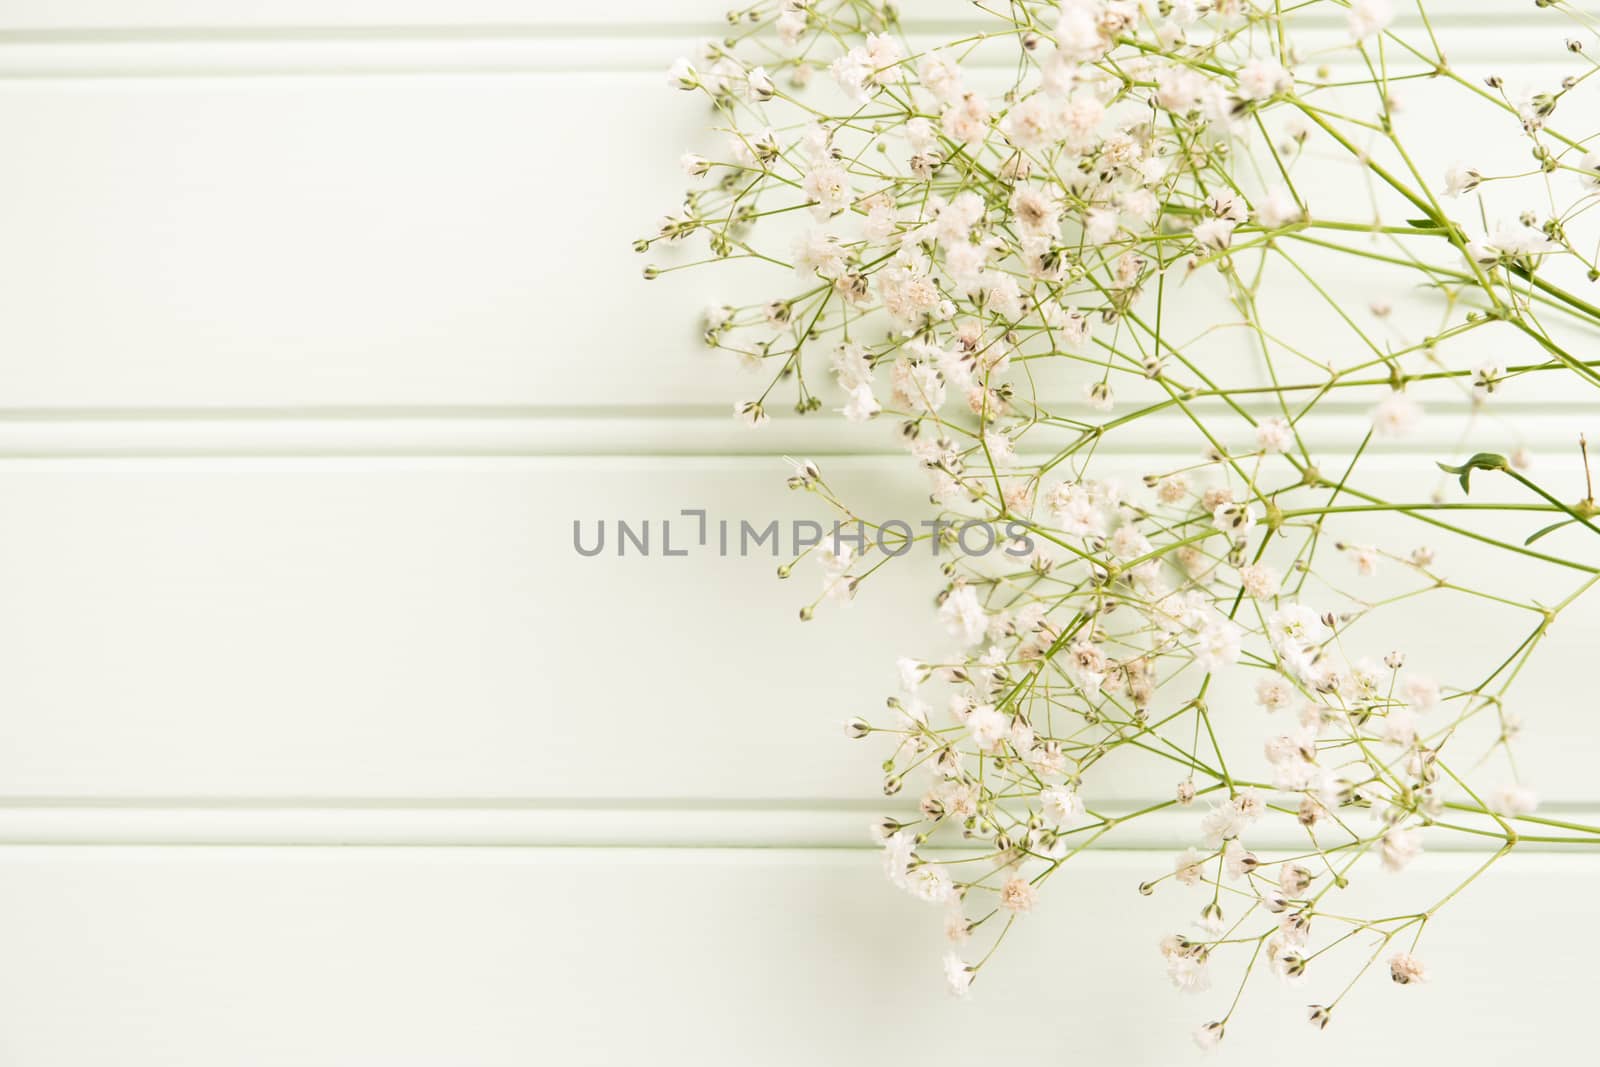 A bouquet of gypsophila flowers lay on the wooden table. Vintage by AnaMarques